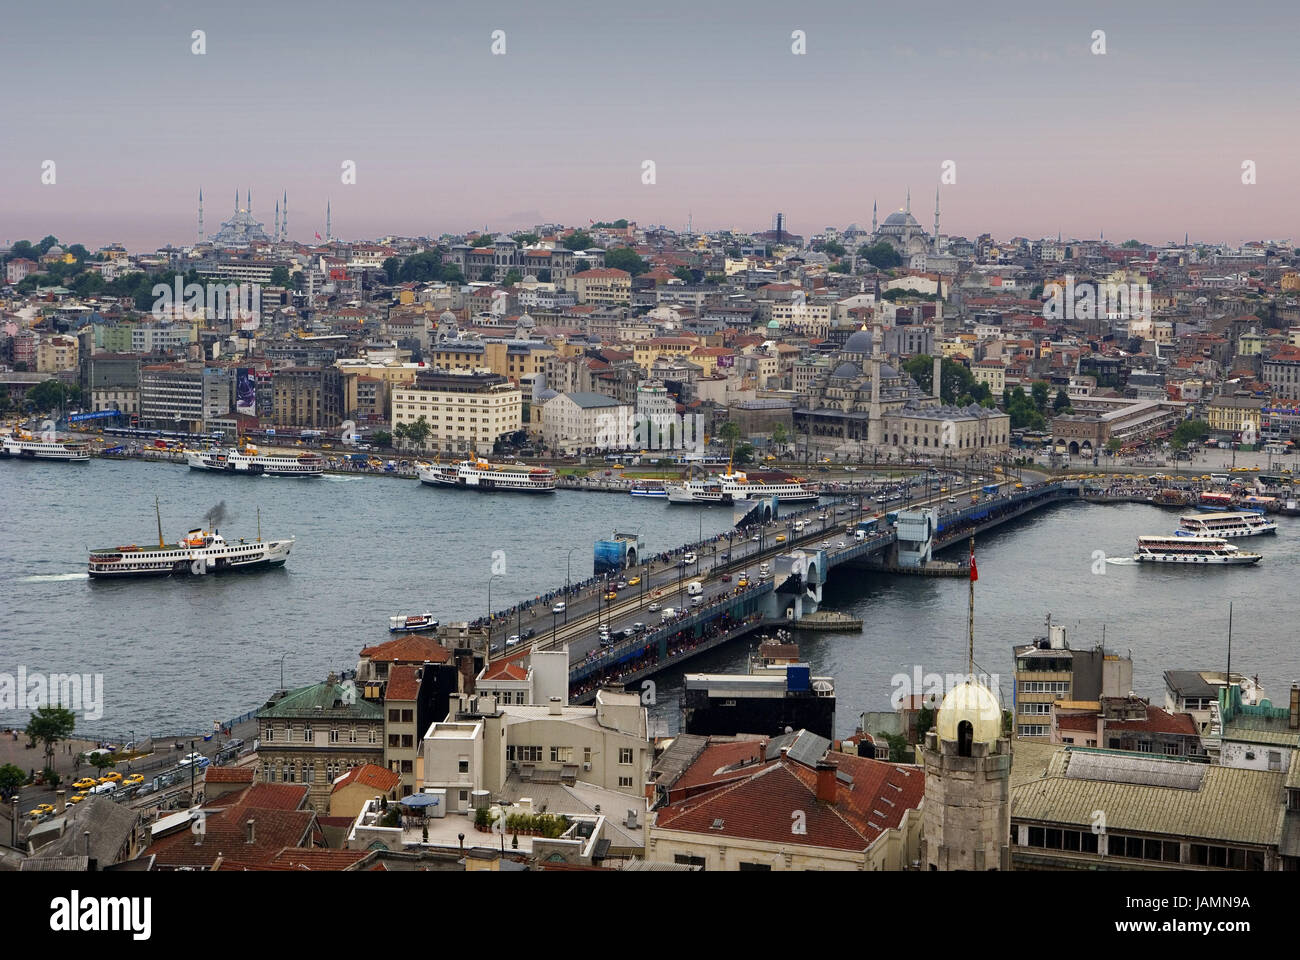 Turkey,Istanbul,town view,'the Golden Horn',ships,Galata bridge,town,city,metropolis,port,culture,place of interest,tourism,architecture,the Bosporus,sea,navigation,holiday ships,dusk, Stock Photo